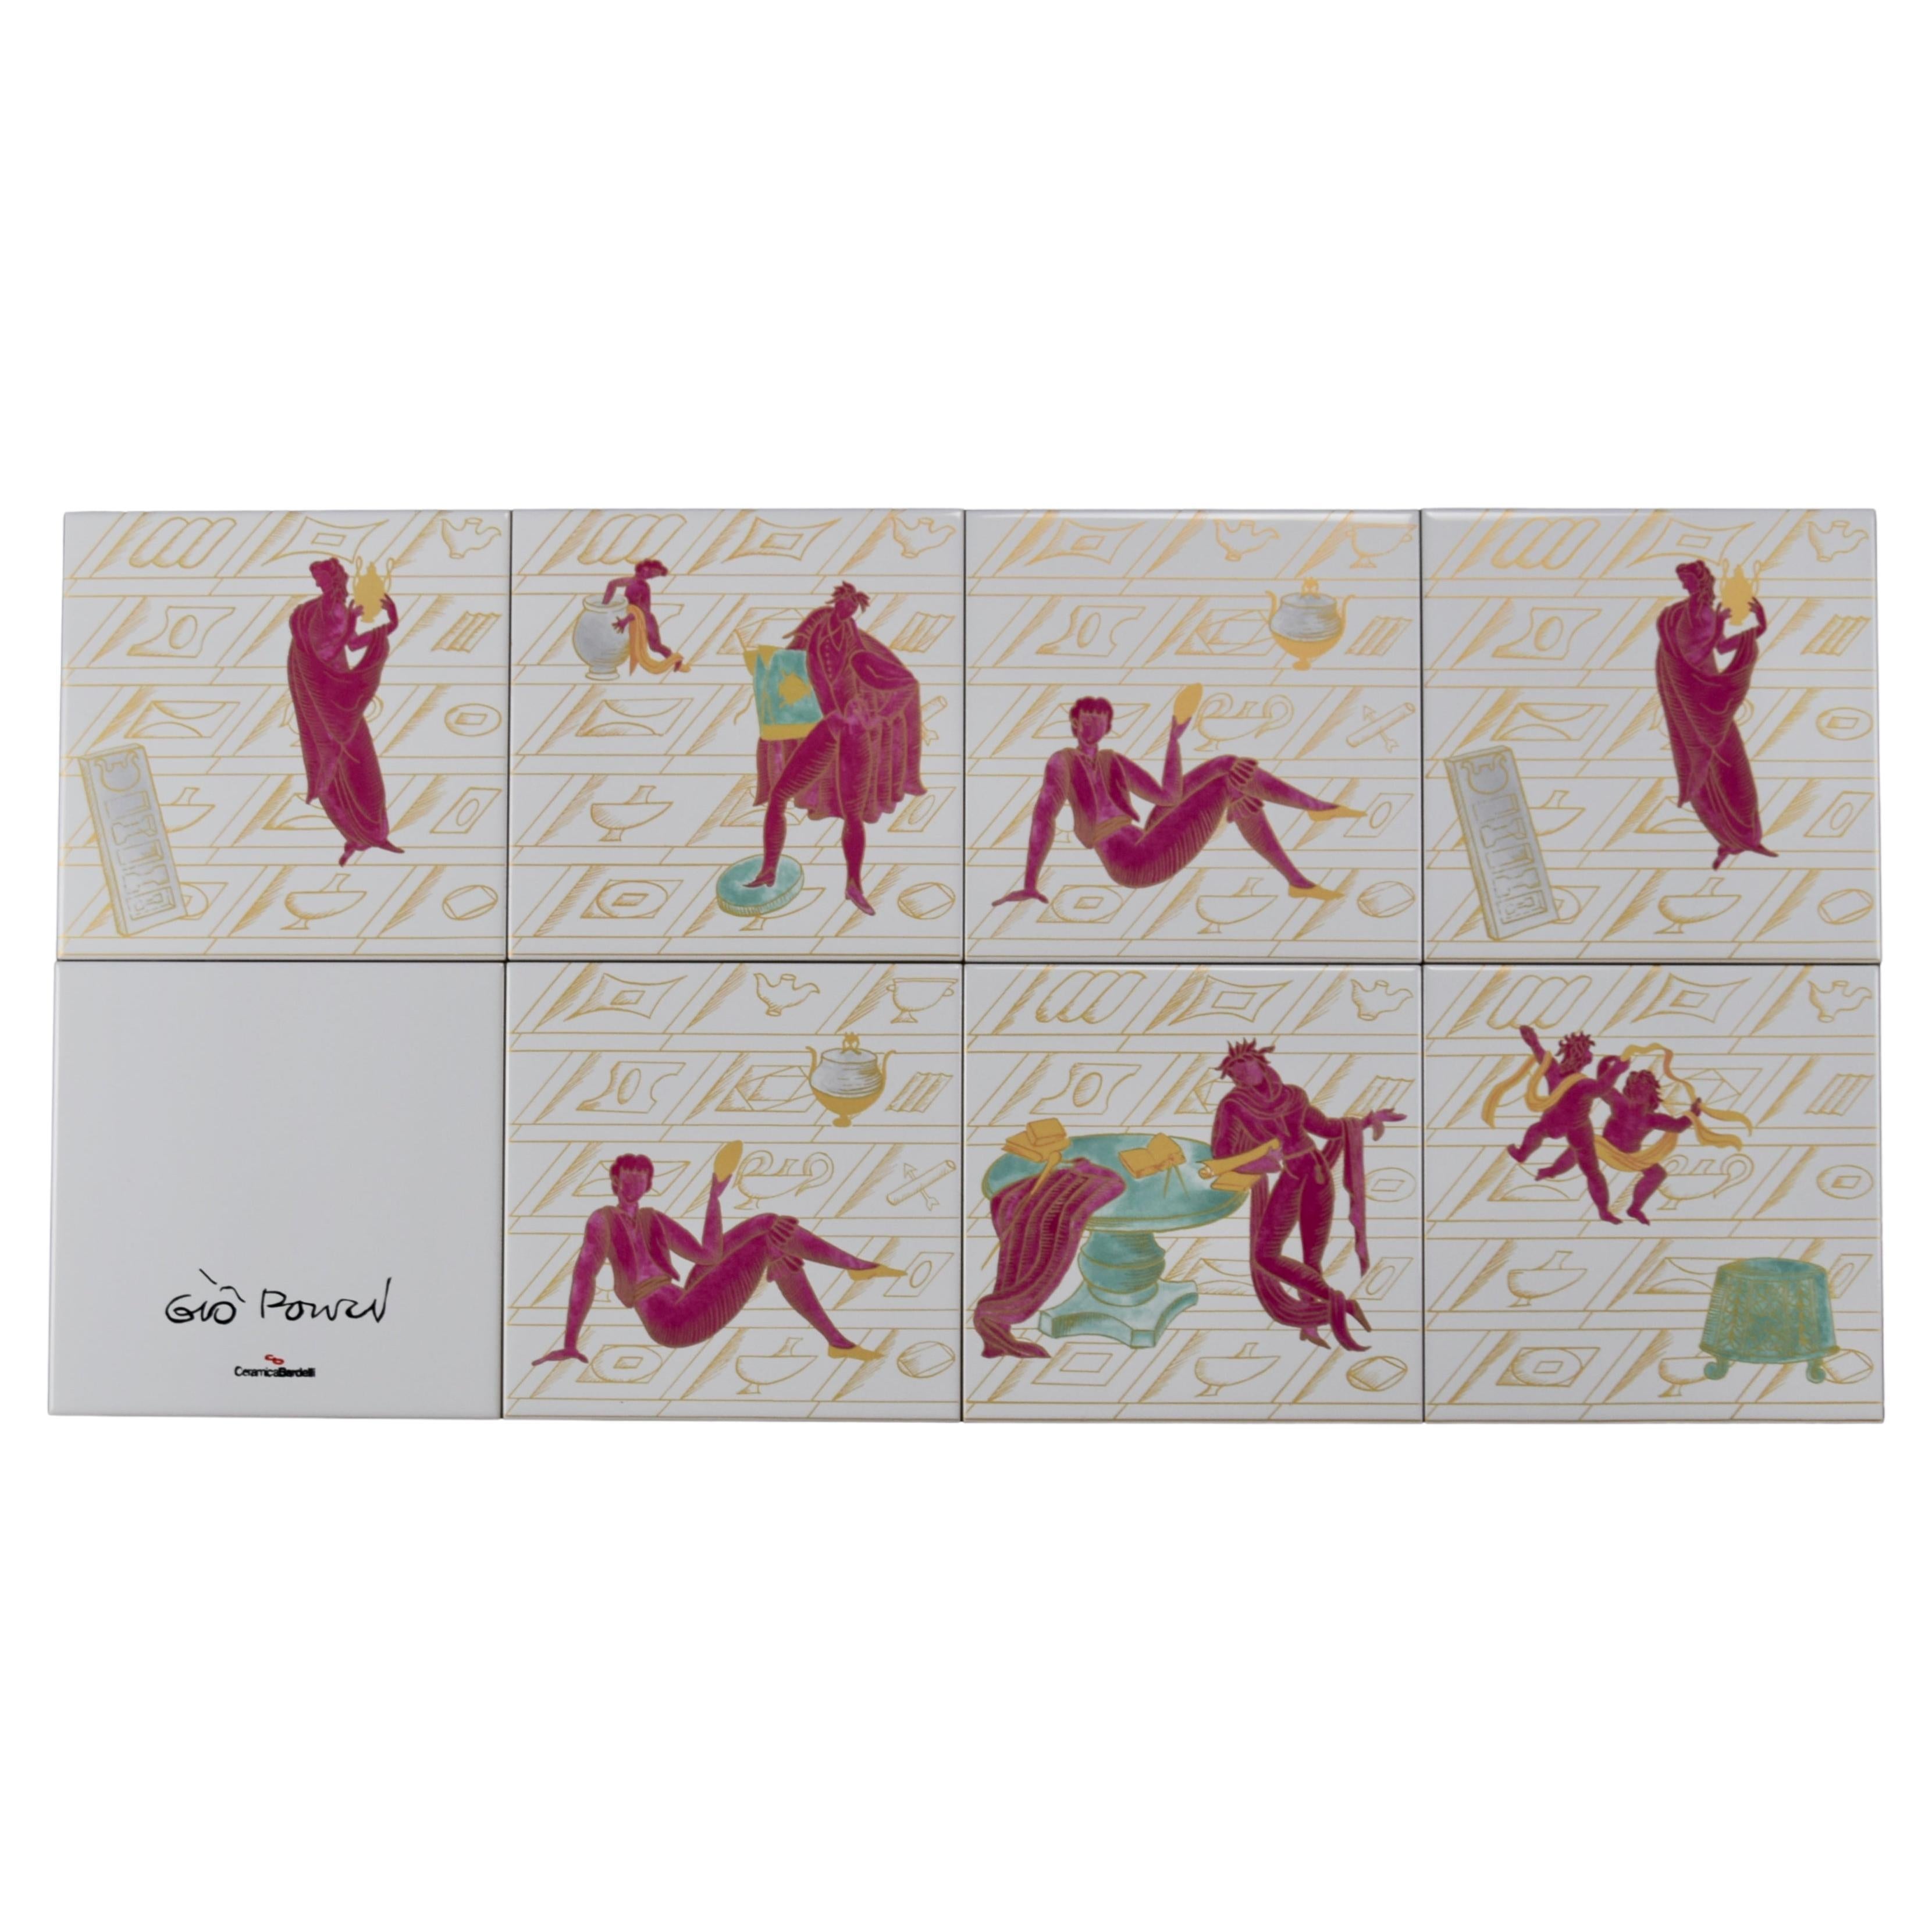 Are you looking for a unique and timeless addition to your home or business? Look no further than these 10 exquisite ceramic tiles designed by the legendary Gio Ponti for Bardelli Ceramica Italy. With their stunning design, 